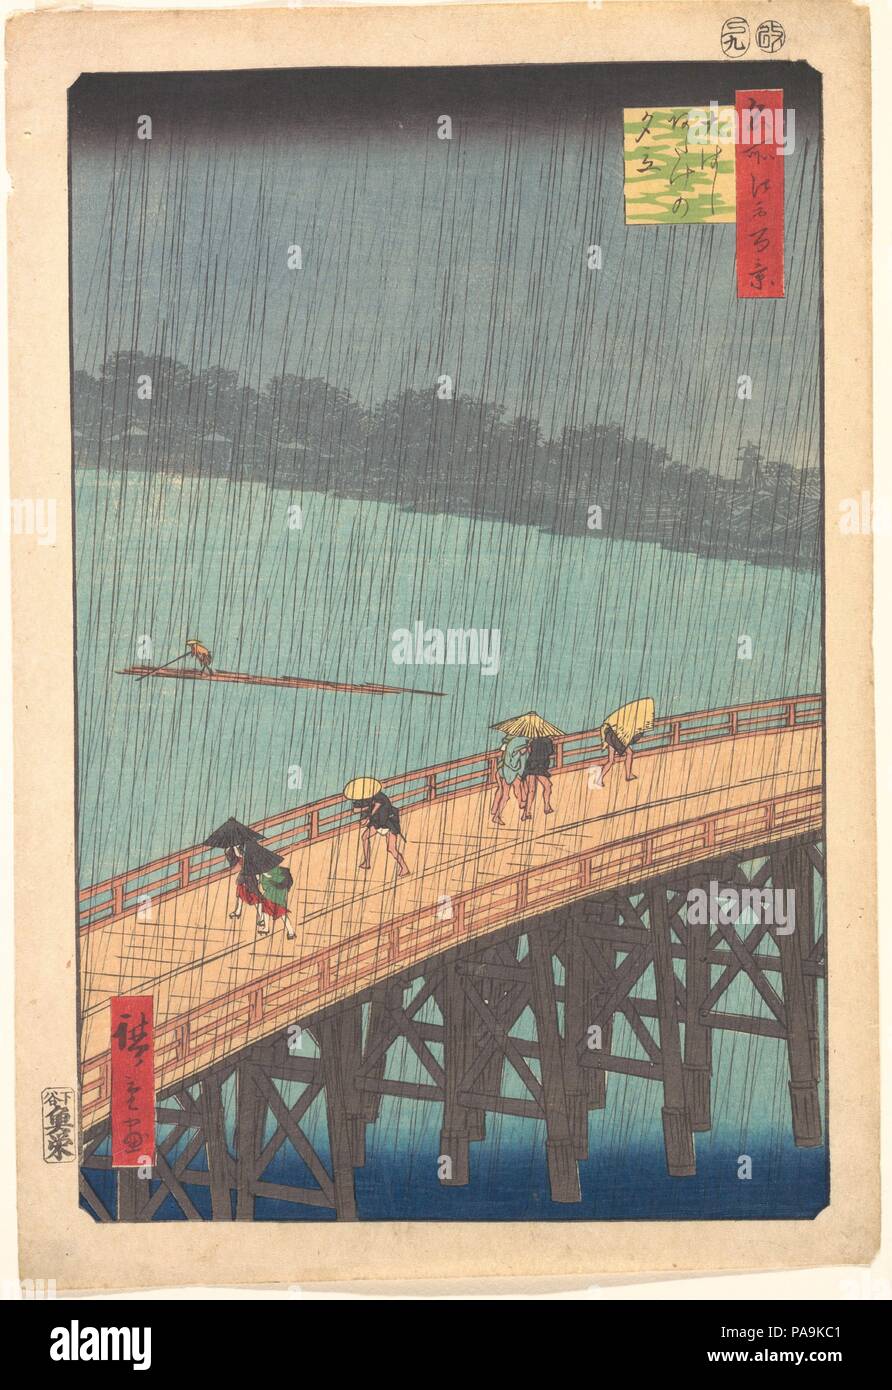 Ohashi Atake no yudachi  Sudden Shower over Shin-Ohashi Bridge and Atake (Ohashi Atake no yudachi), from the series One Hundred Famous Views of Edo (Meisho Edo hyakkei). Artist: Utagawa Hiroshige (Japanese, Tokyo (Edo) 1797-1858 Tokyo (Edo)). Culture: Japan. Dimensions: Oban 13 3/8 x 9 1/2 in. (34 x 24.1 cm). Date: 1857.  The heavens open. The sudden shower, a favorite subject of Edo haiku poets and ukiyo-e artists, is often depicted with a crisscrossing pattern of fine lines of rain--a difficult woodblock technique. Here, the netlike pattern is superimposed over an intensely focused image of  Stock Photo